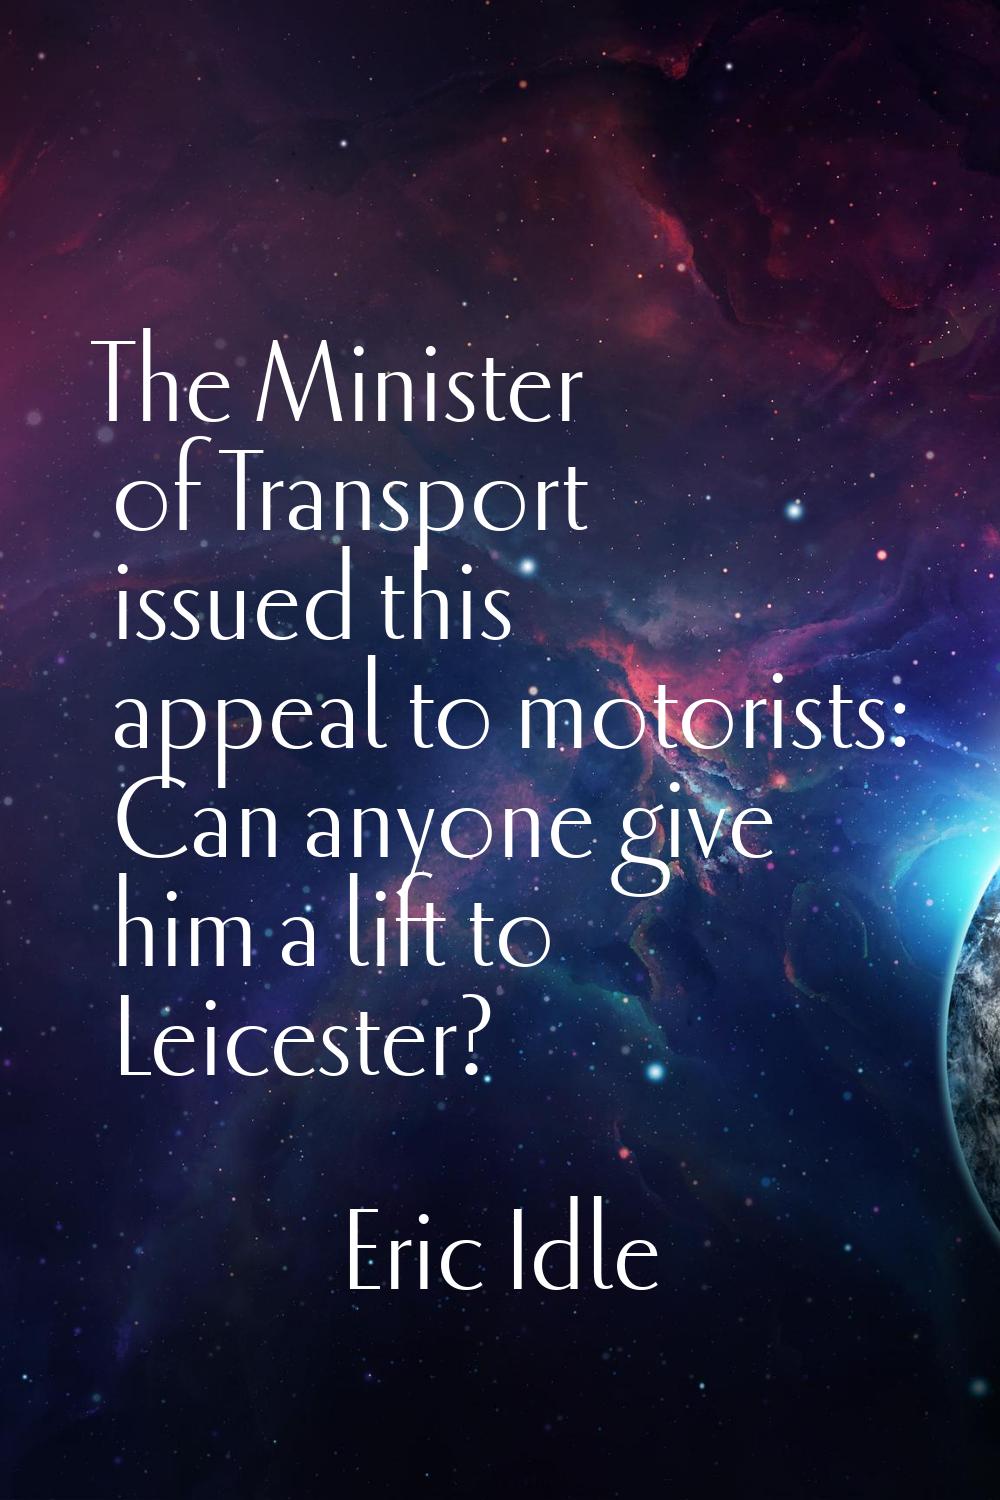 The Minister of Transport issued this appeal to motorists: Can anyone give him a lift to Leicester?